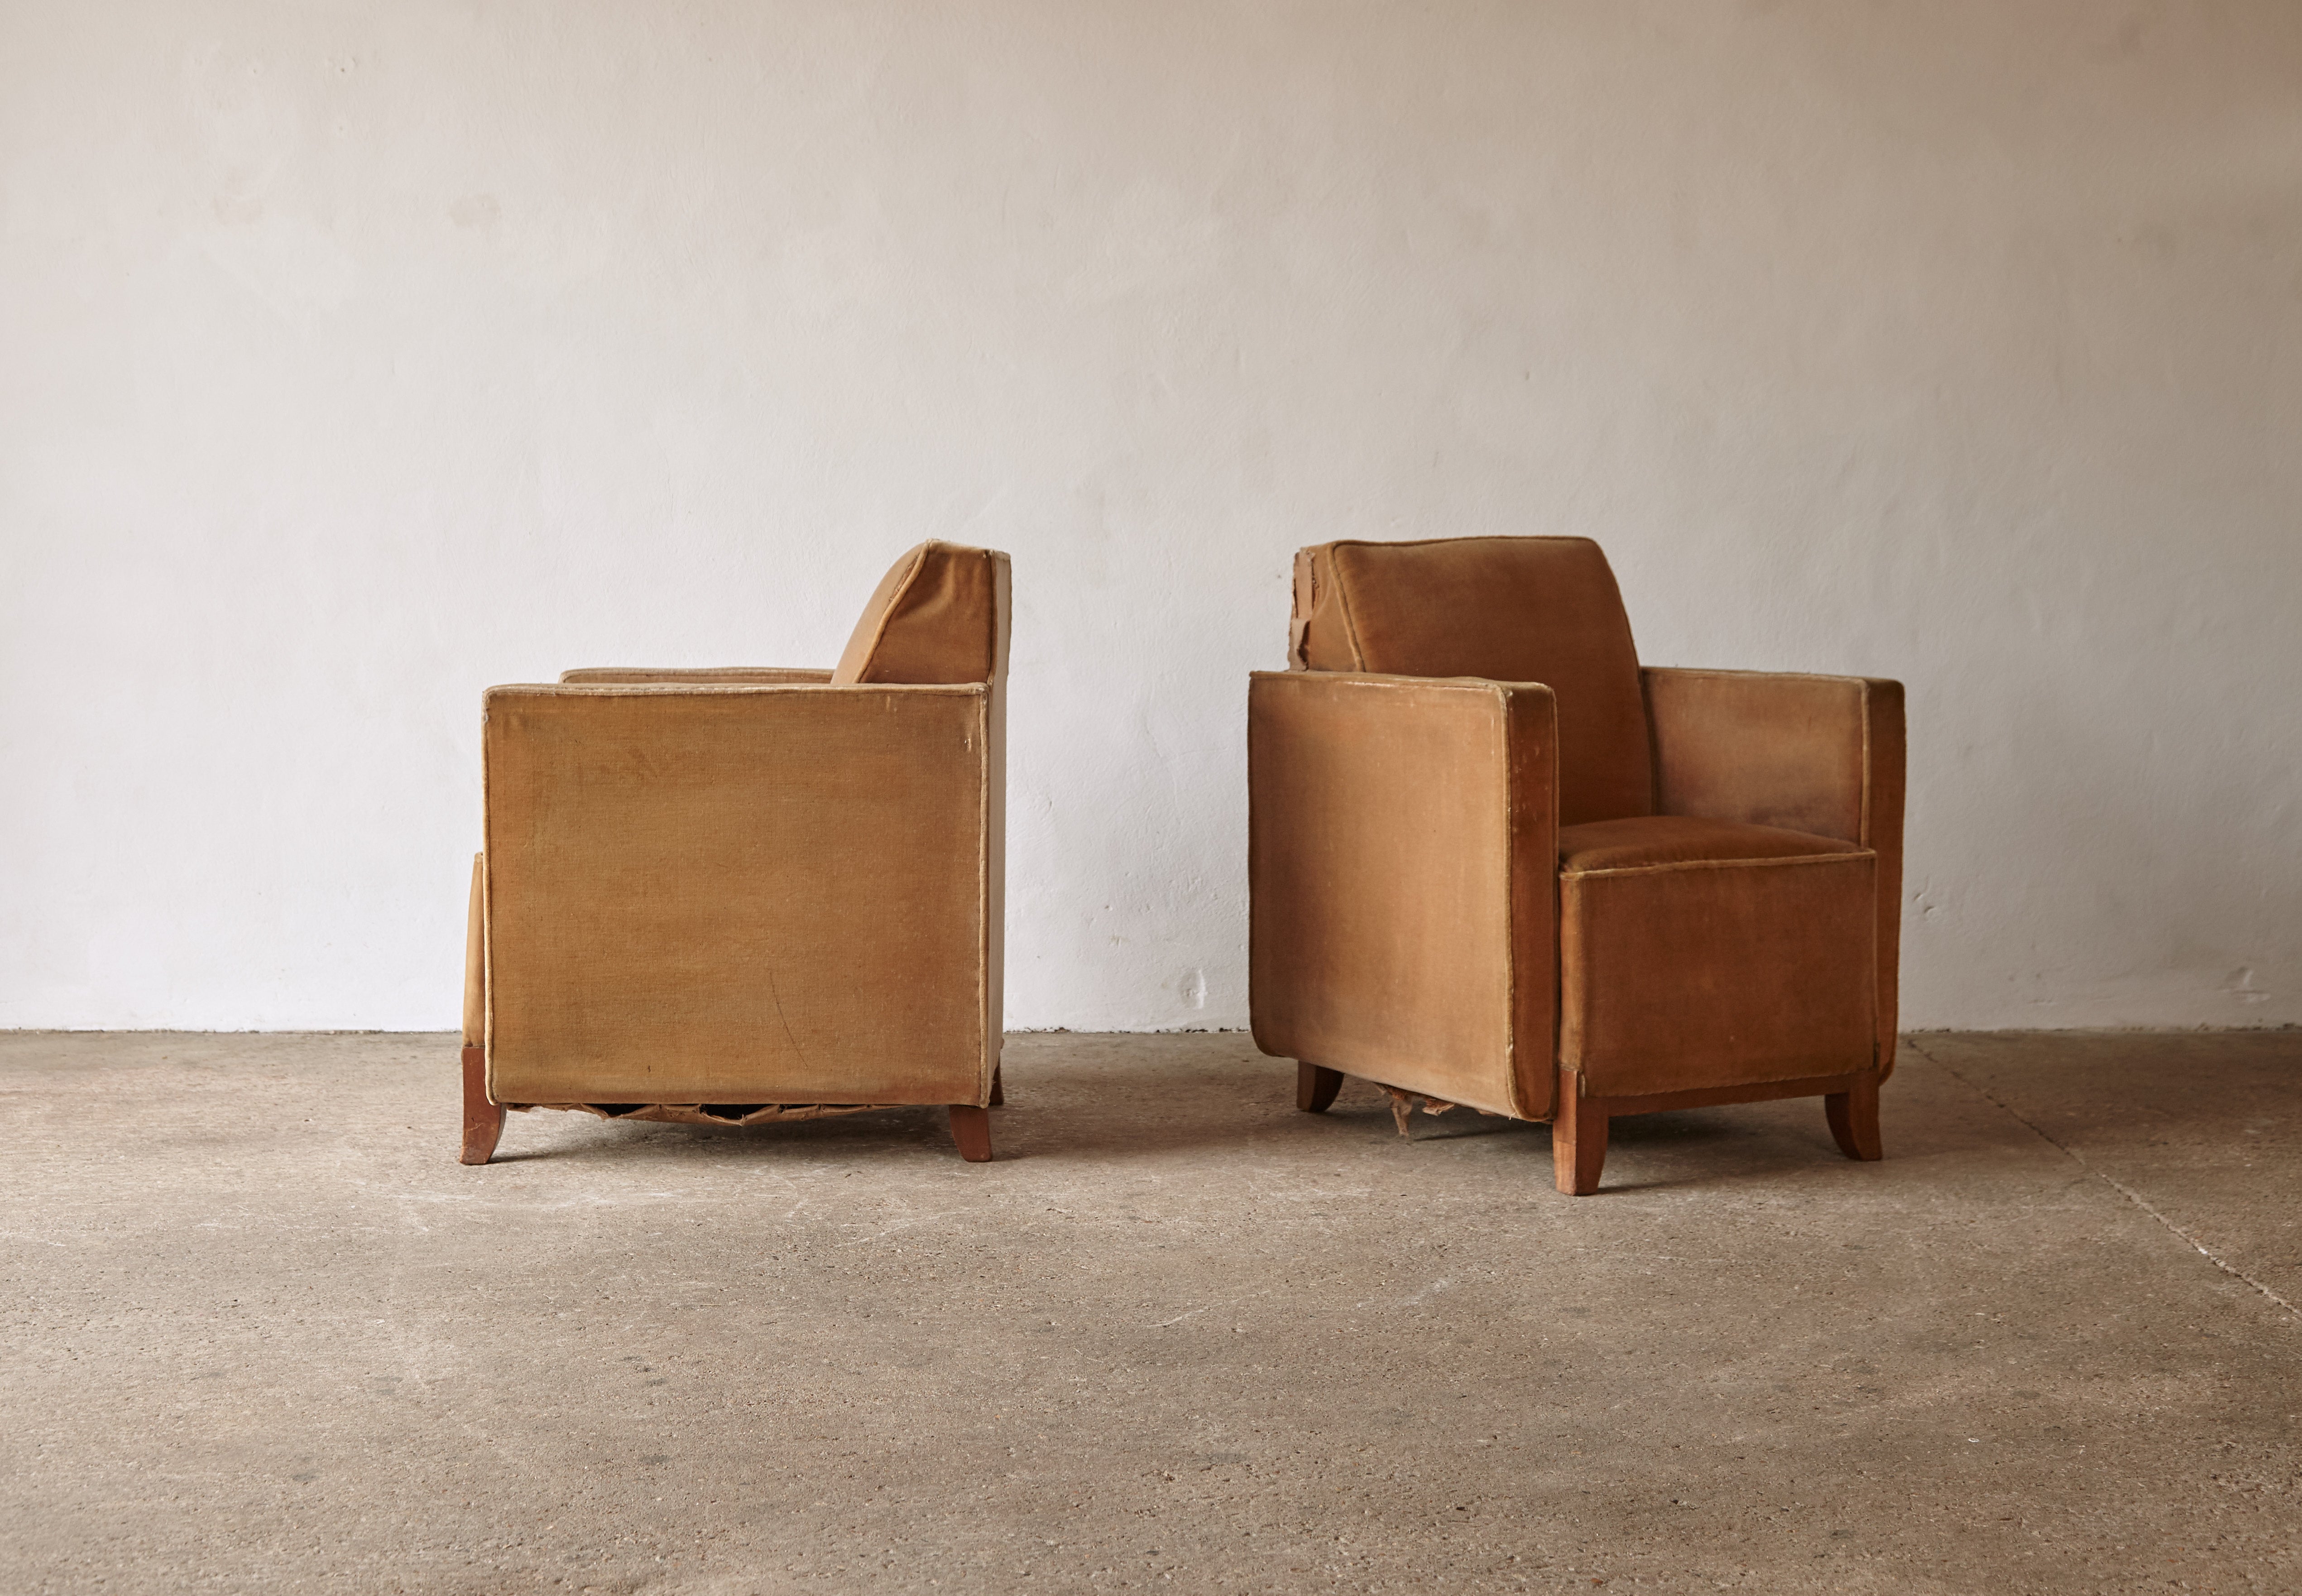 A rare pair of refined cubic French club chairs from the 1950s. The chairs require reupholstery. Fast shipping worldwide.
  

UK customers please note: Prices do not include VAT.